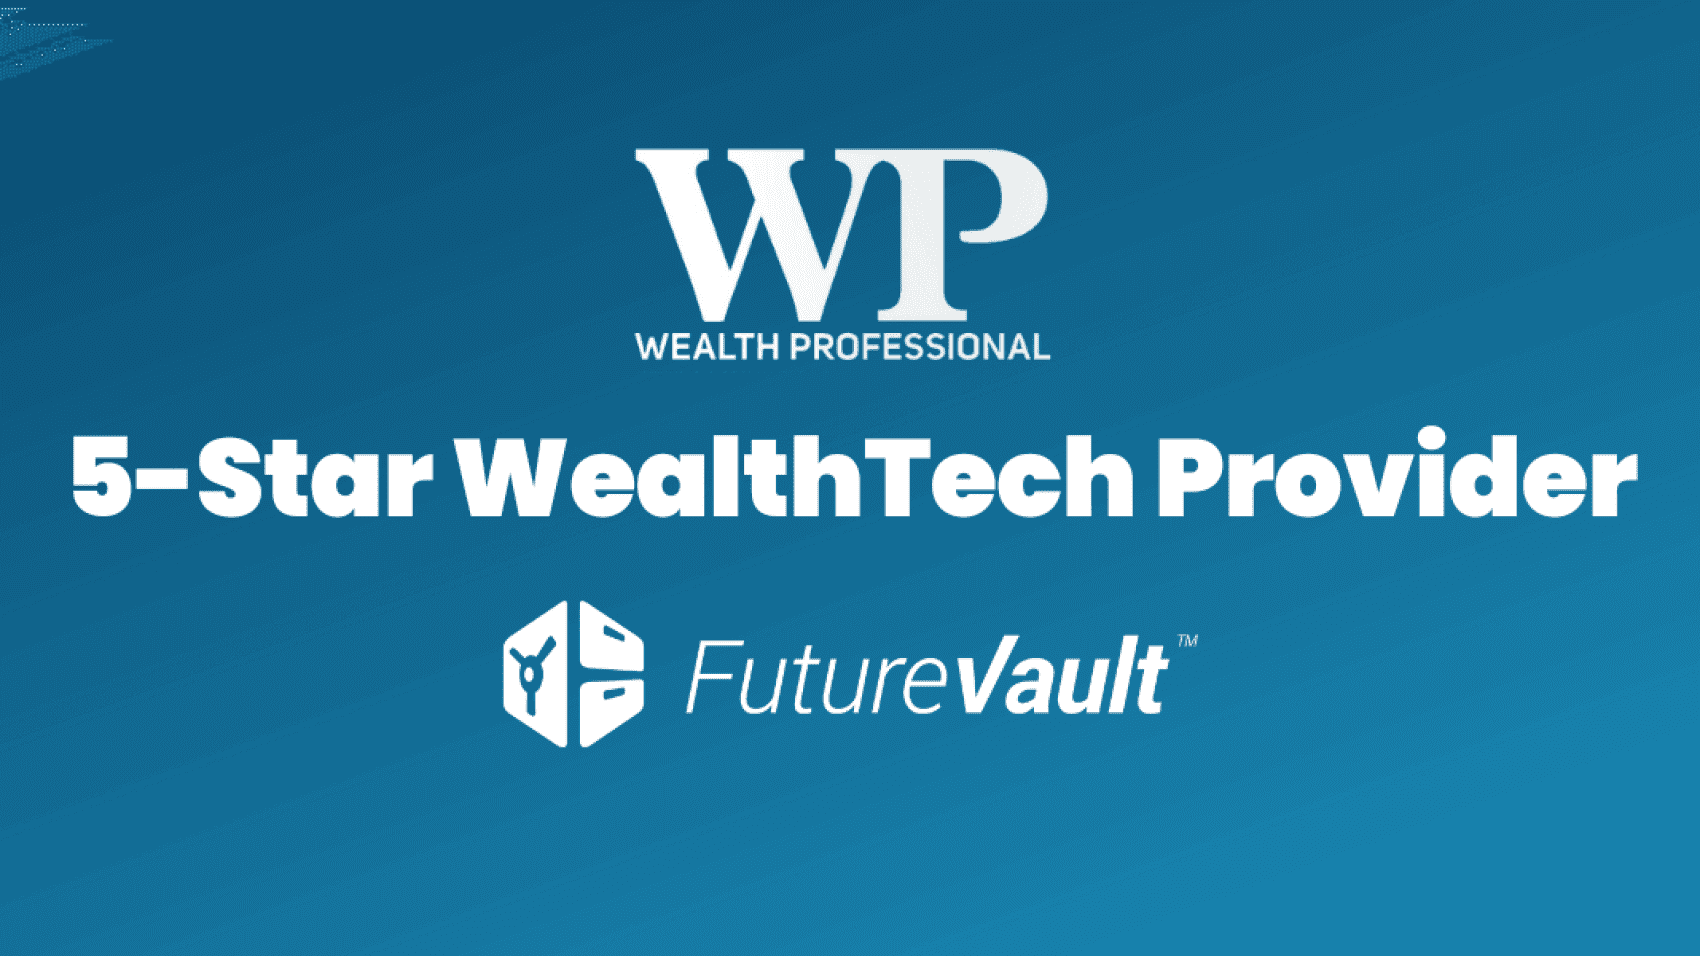 FutureVault Named 5-Star WealthTech Provider by Wealth Professional Canada Magazine